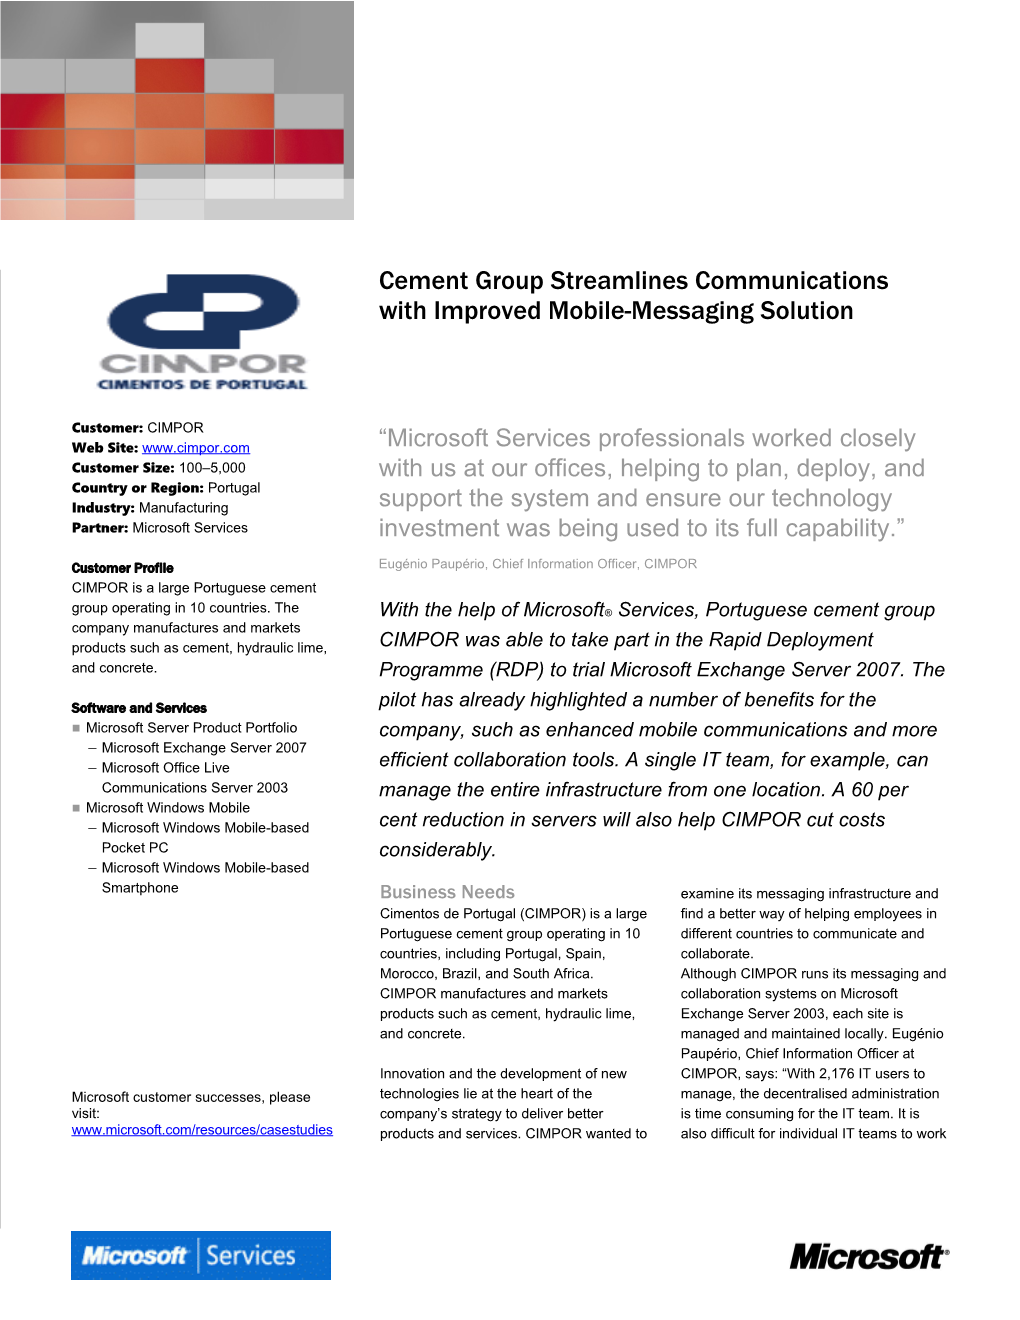 Global Cement Group Streamlines Communications Infrastructure with Messaging Solution